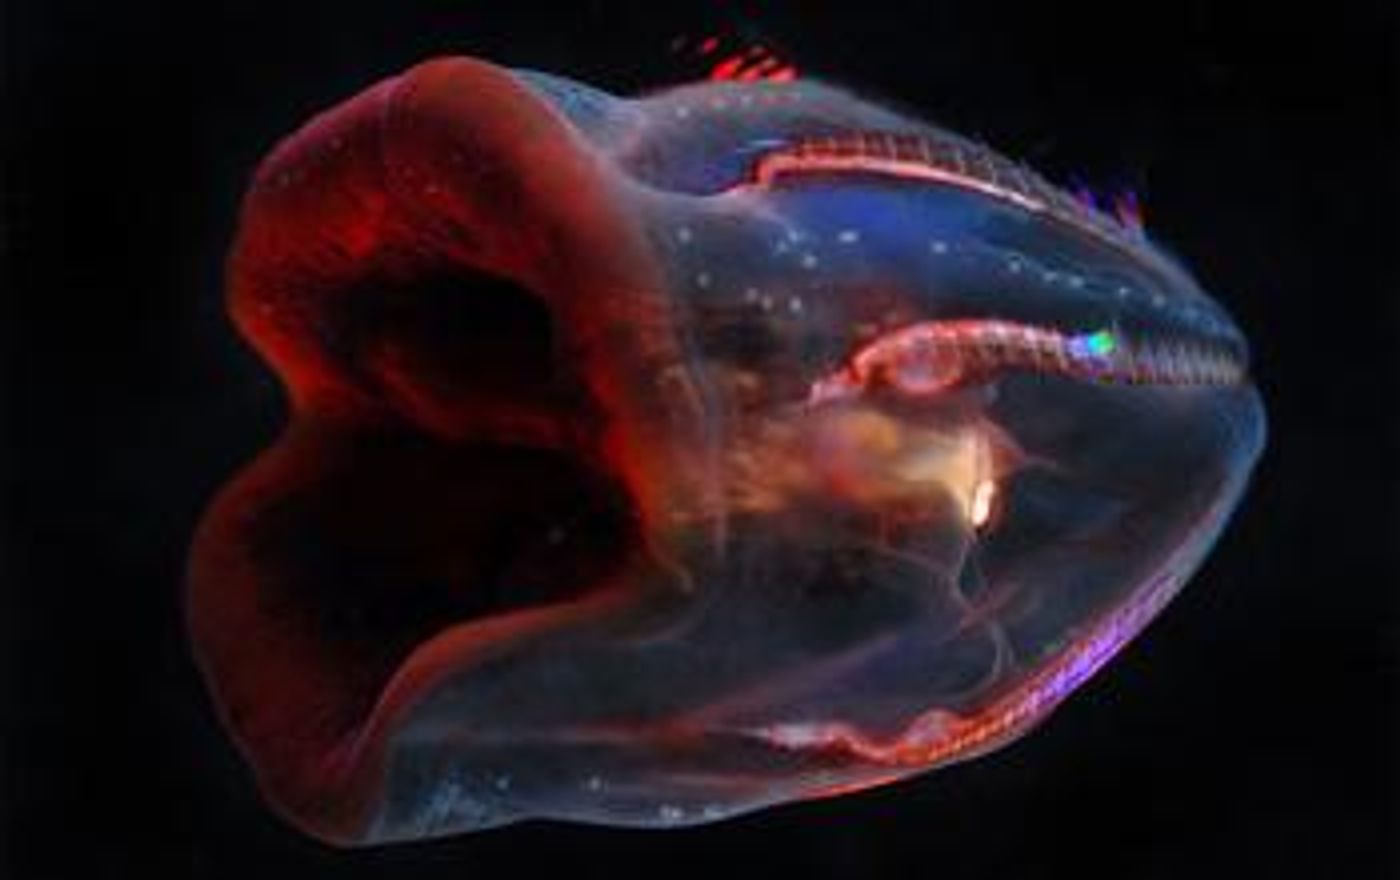 This deep-sea ctenophore, or comb jelly, shows the dark red color typical of deep-sea species. / Credit:  Steve Haddock